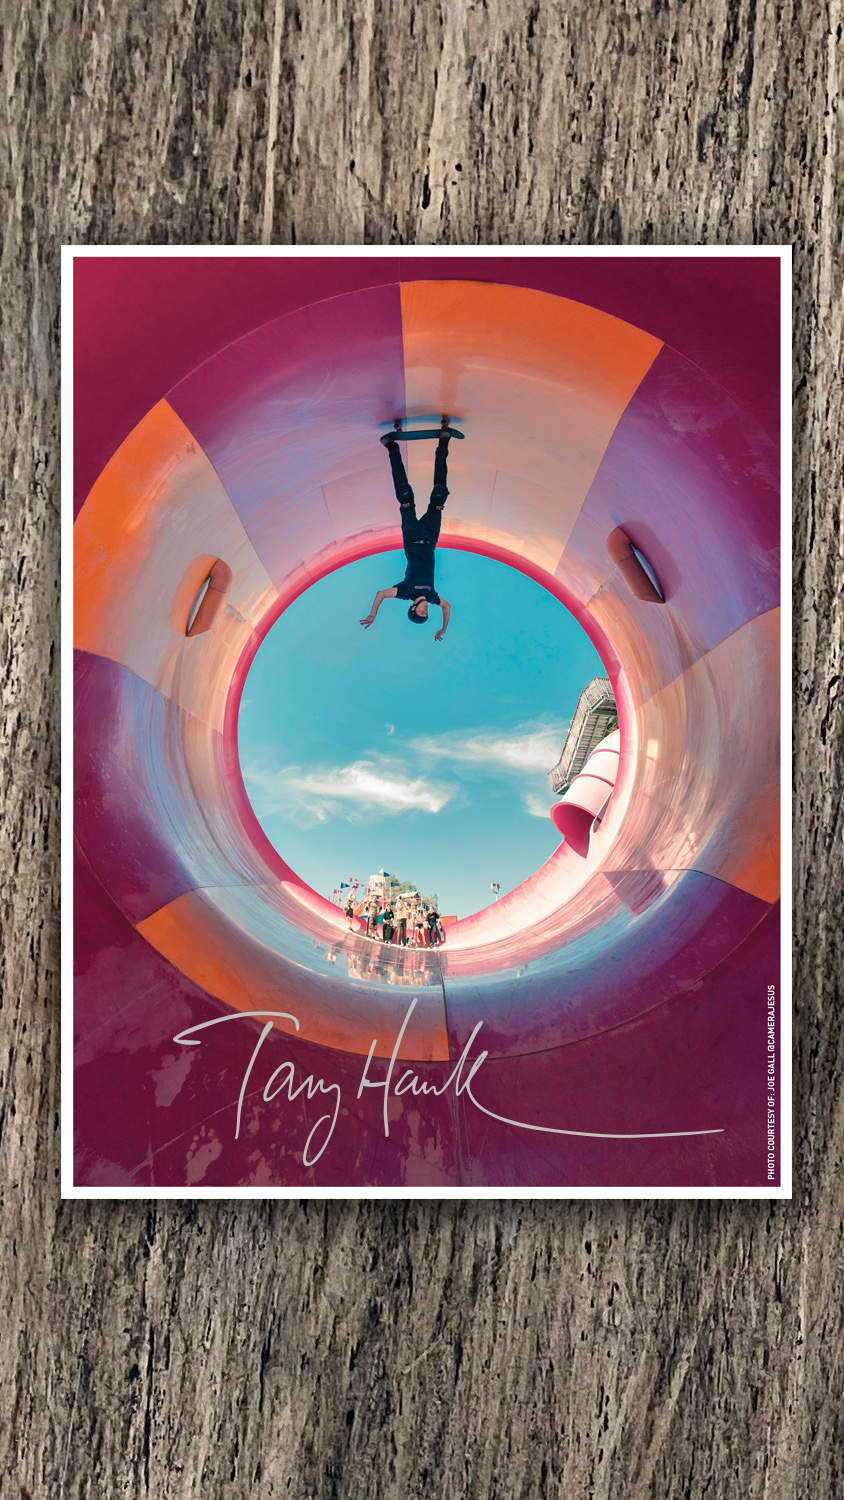 Tony Hawk Autograph to Support the Tony Hawk Foundation and Direct Relief